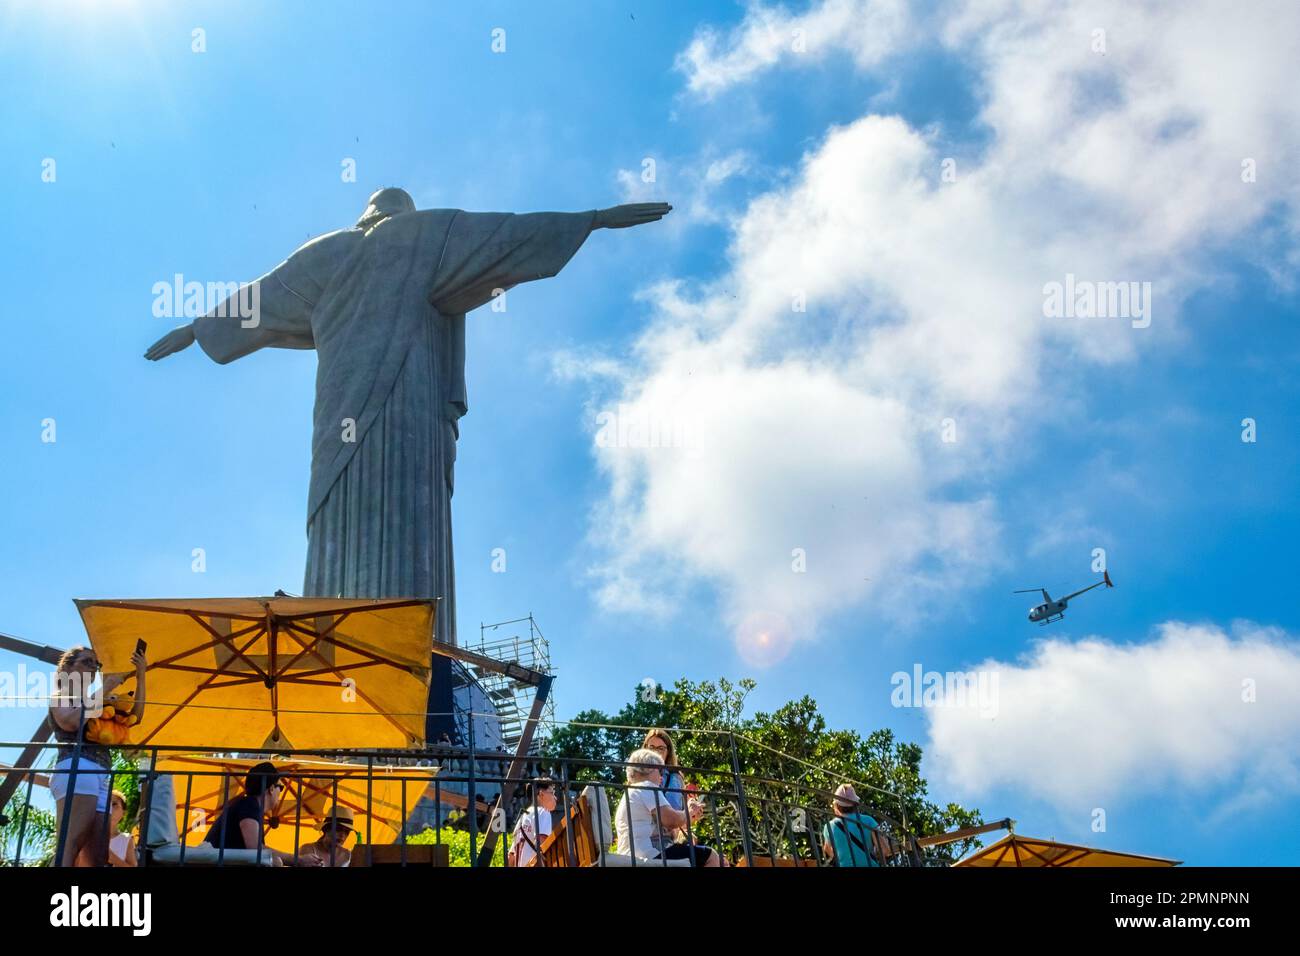 Rio de Janeiro, Brazil - April 4, 2023: Unusual view of the Christ the Redeemer statue. The piece of art has an art-deco style. Stock Photo